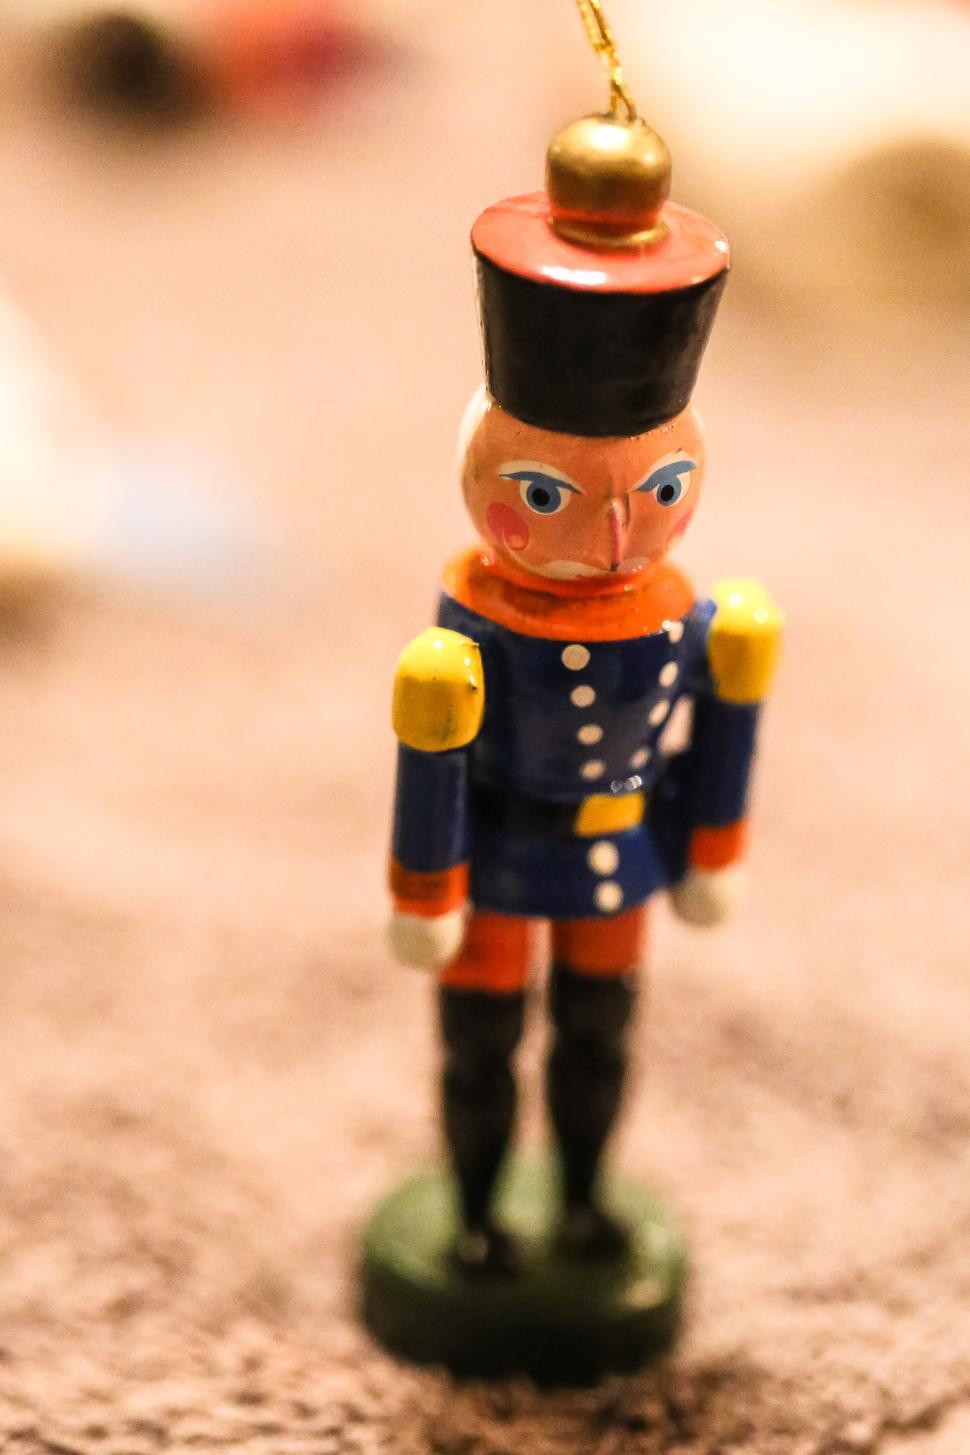 Free Image of Toy Soldier 